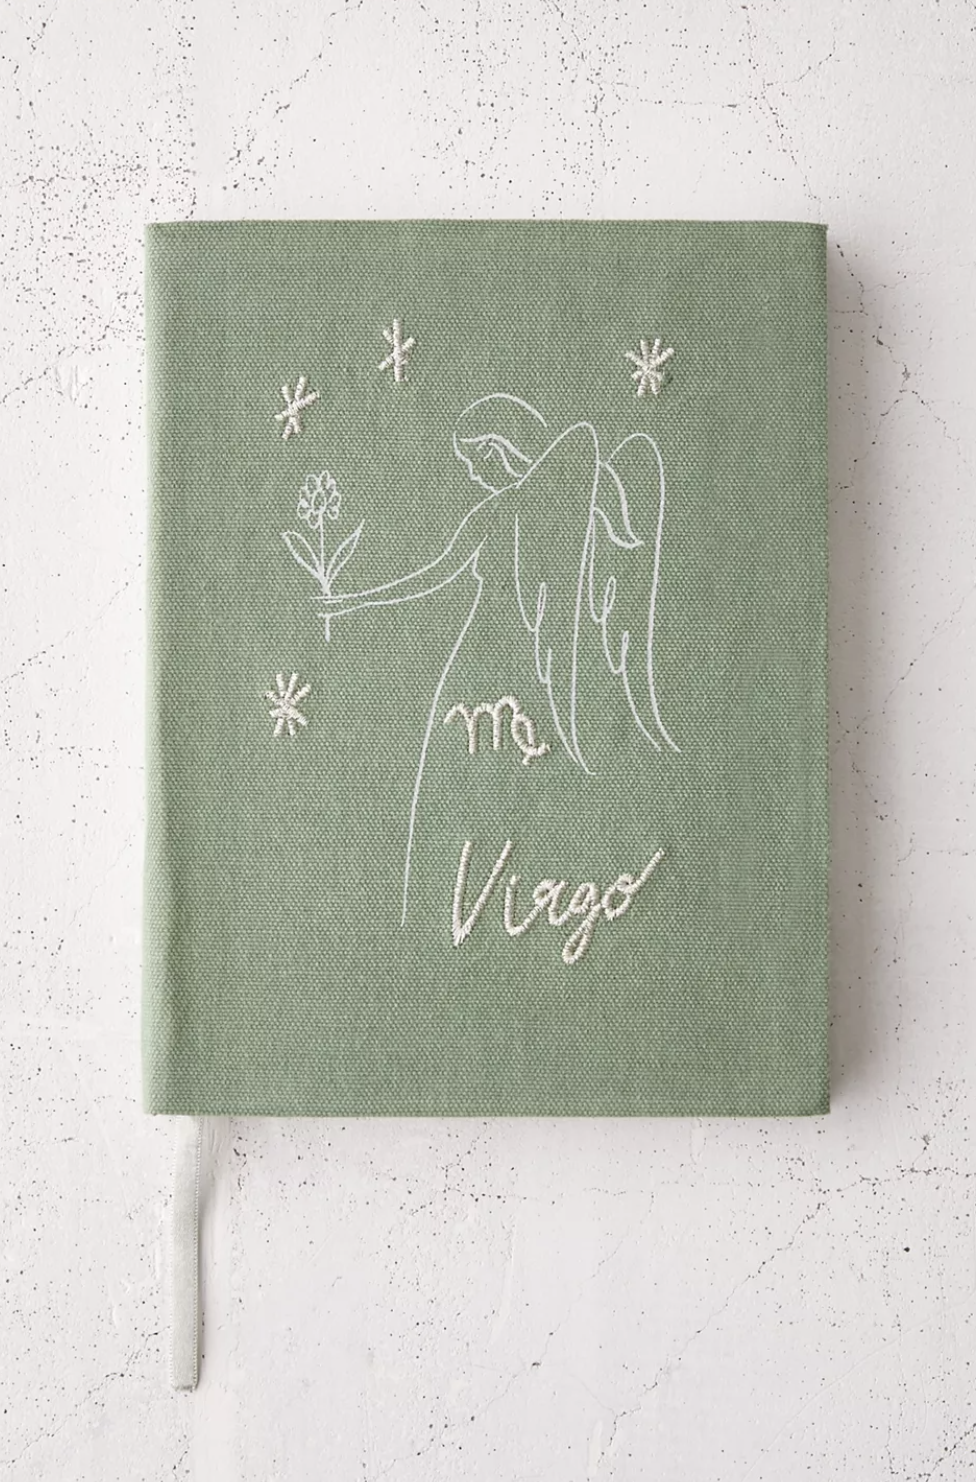 the green virgo journal with an embroidered angel on the cover